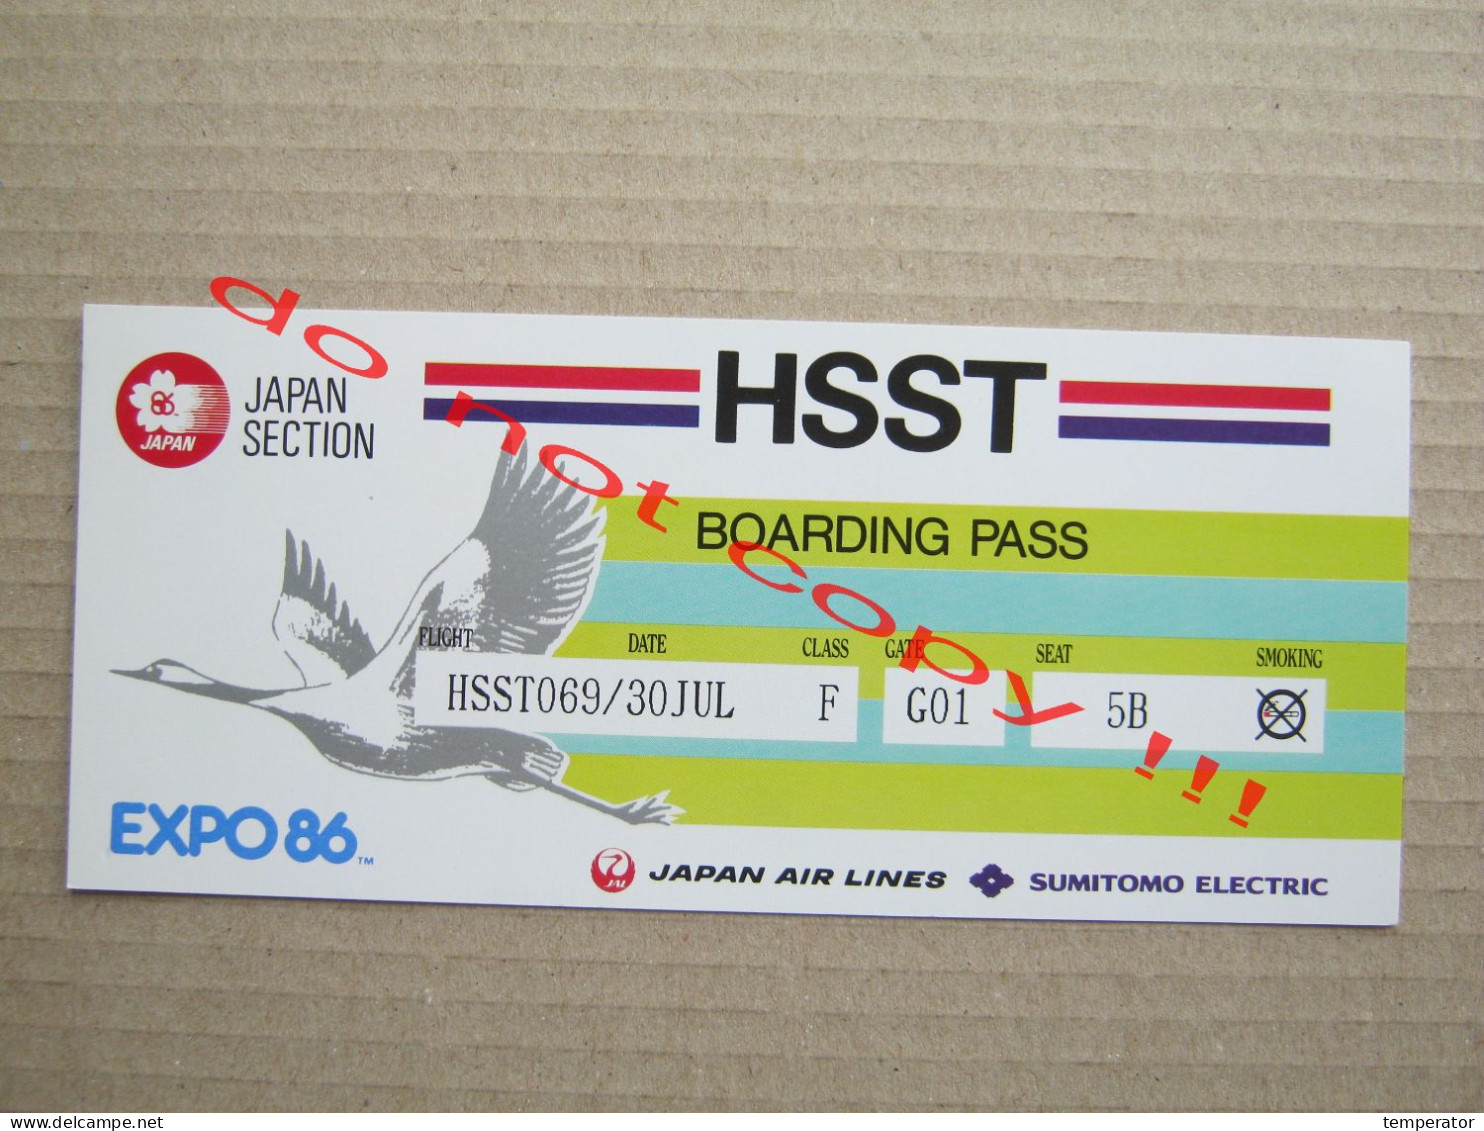 JAPAN AIR LINES 1986 EXPO 86 AIRPLANE BOARDING PASS HSST JAPAN SECTION ( 3 ) - Cartes D'embarquement